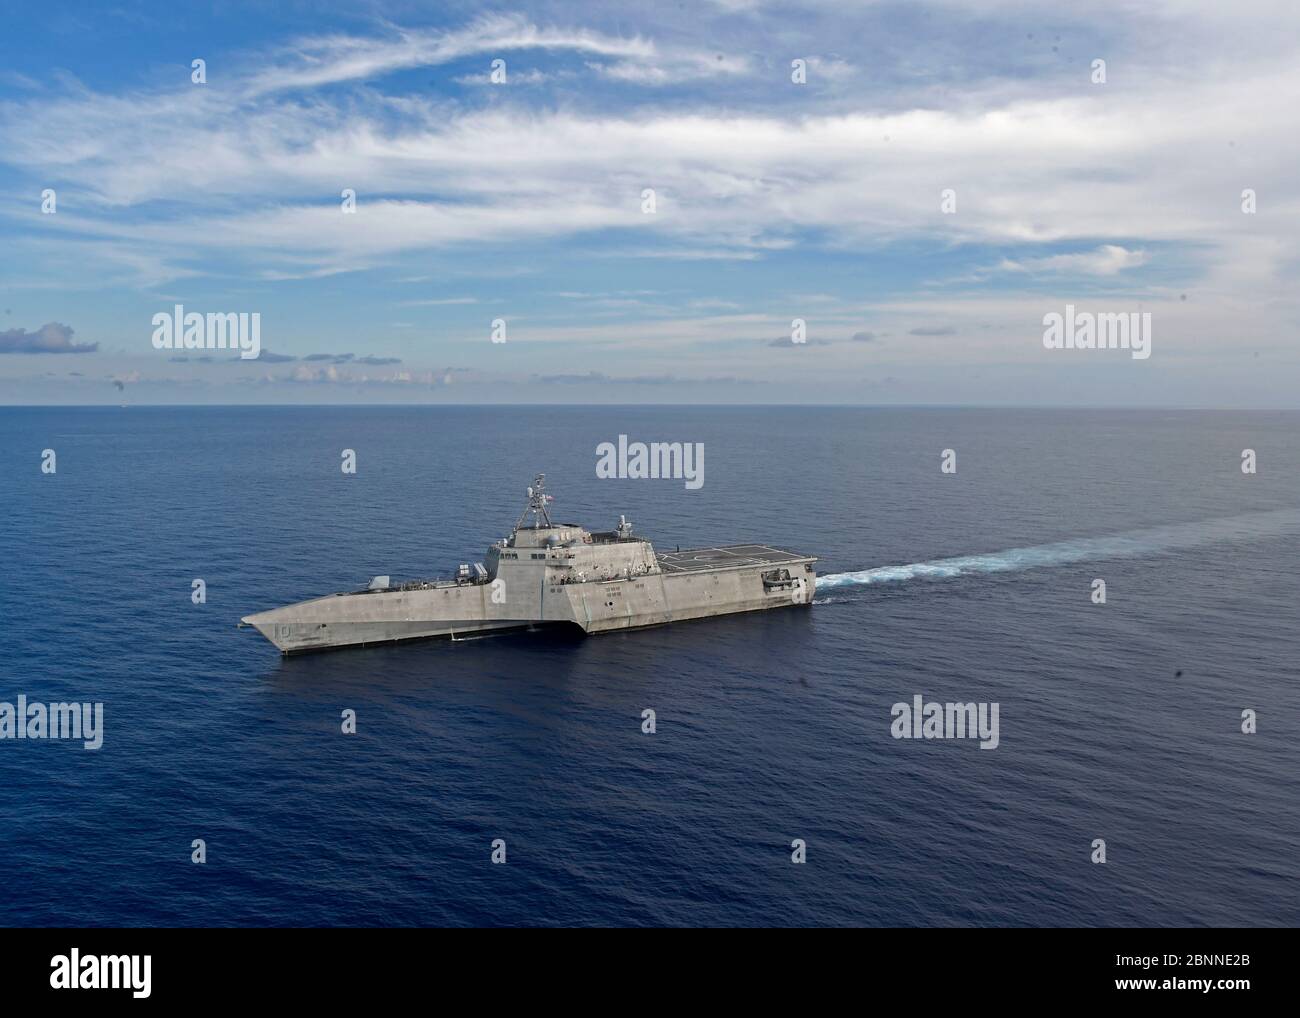 The U.S. Navy Independence-variant littoral combat ship USS Gabrielle Giffords patrols near the Panamanian flagged drill ship, West Capella which has been harassed by Chinese forces for drilling in disputed waters May 13, 2020 in the South China Sea. Stock Photo